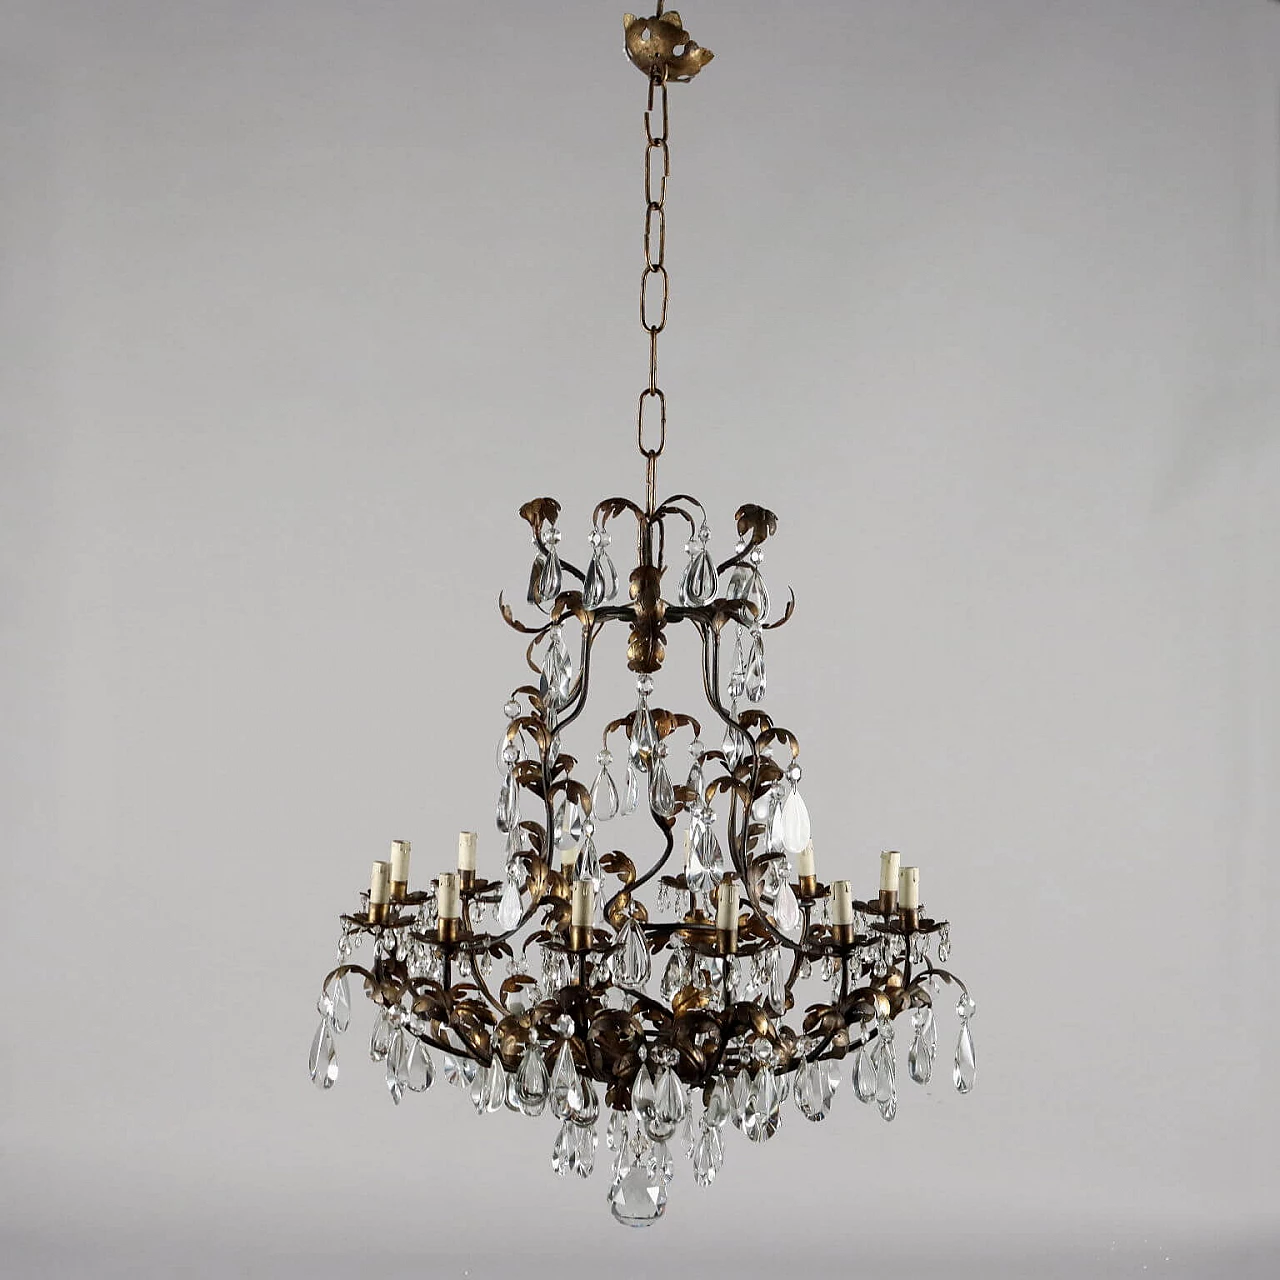 12-light chandelier made of sheet metal and glass pendants 1